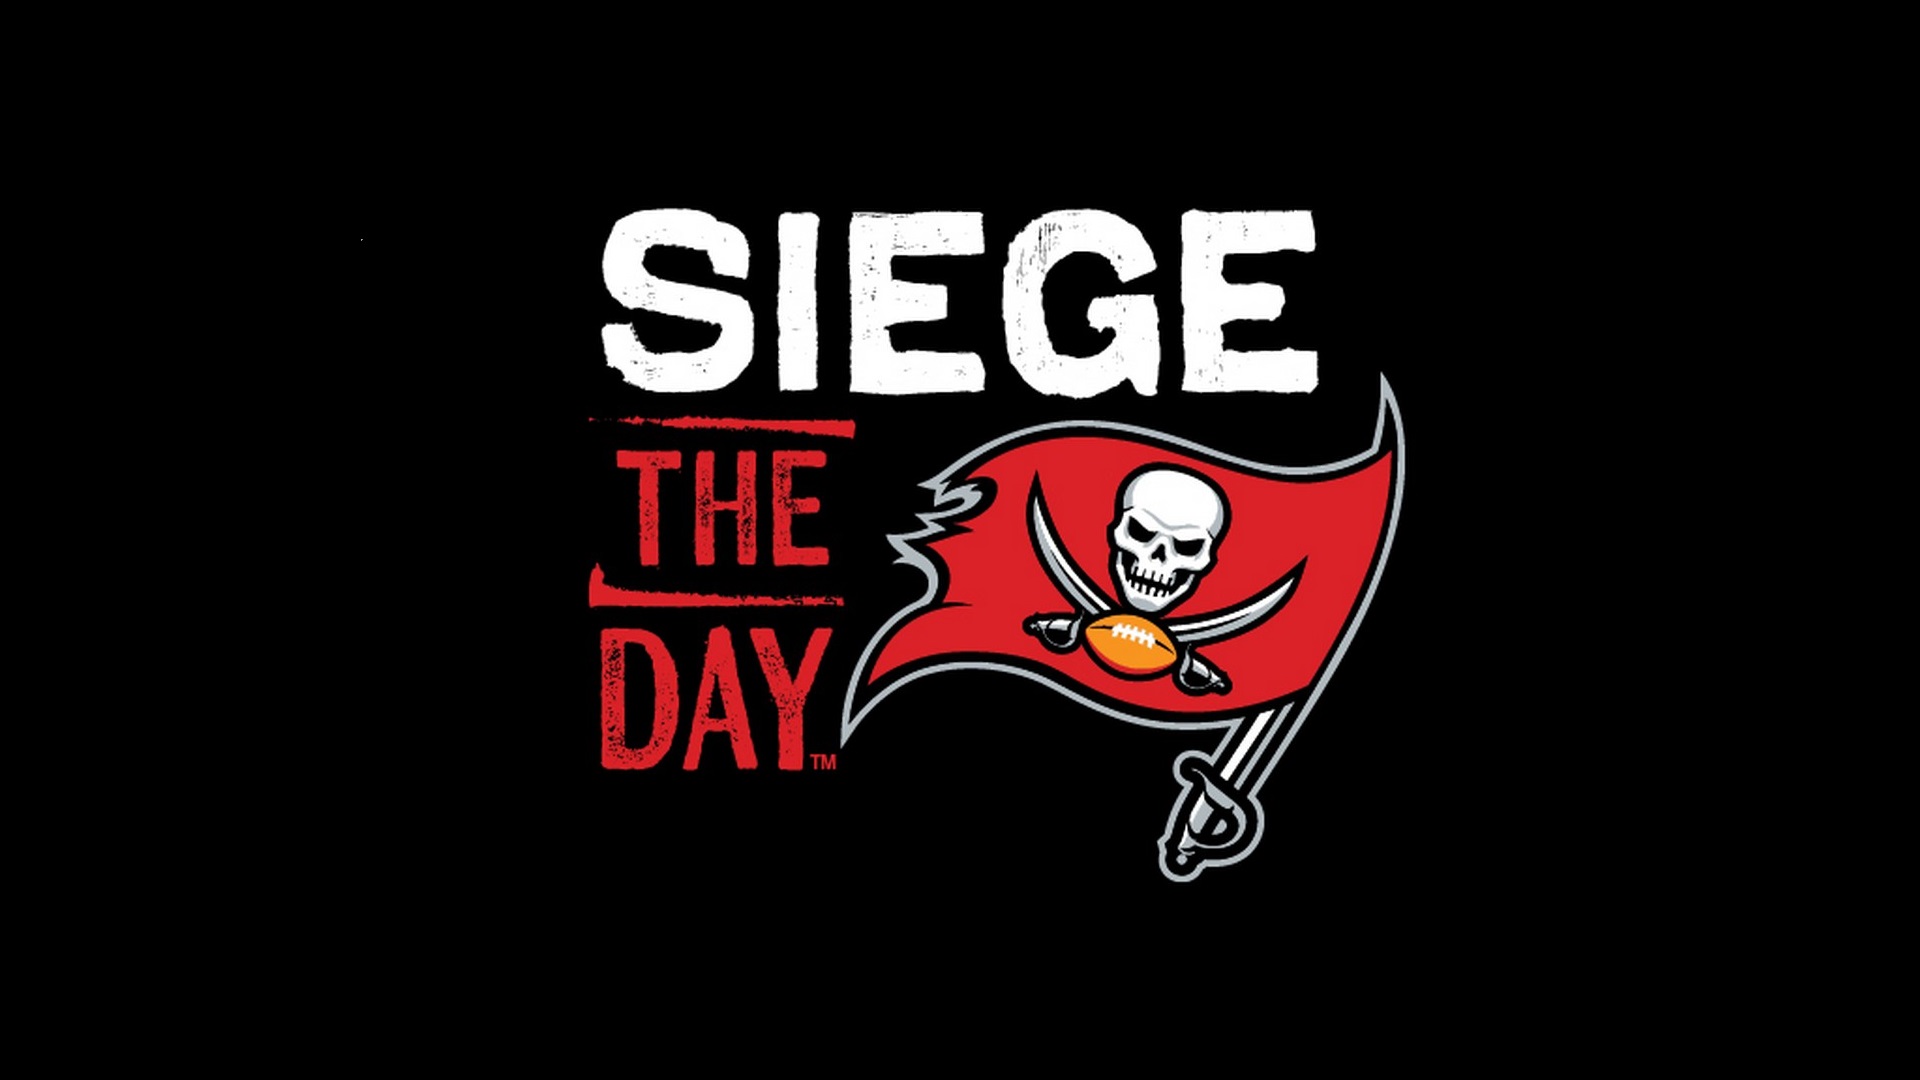 Tampa Bay Buccaneers Wallpaper in HD with high-resolution 1920x1080 pixel. Download and set as wallpaper for Desktop Computer, Apple iPhone X, XS Max, XR, 8, 7, 6, SE, iPad, Android